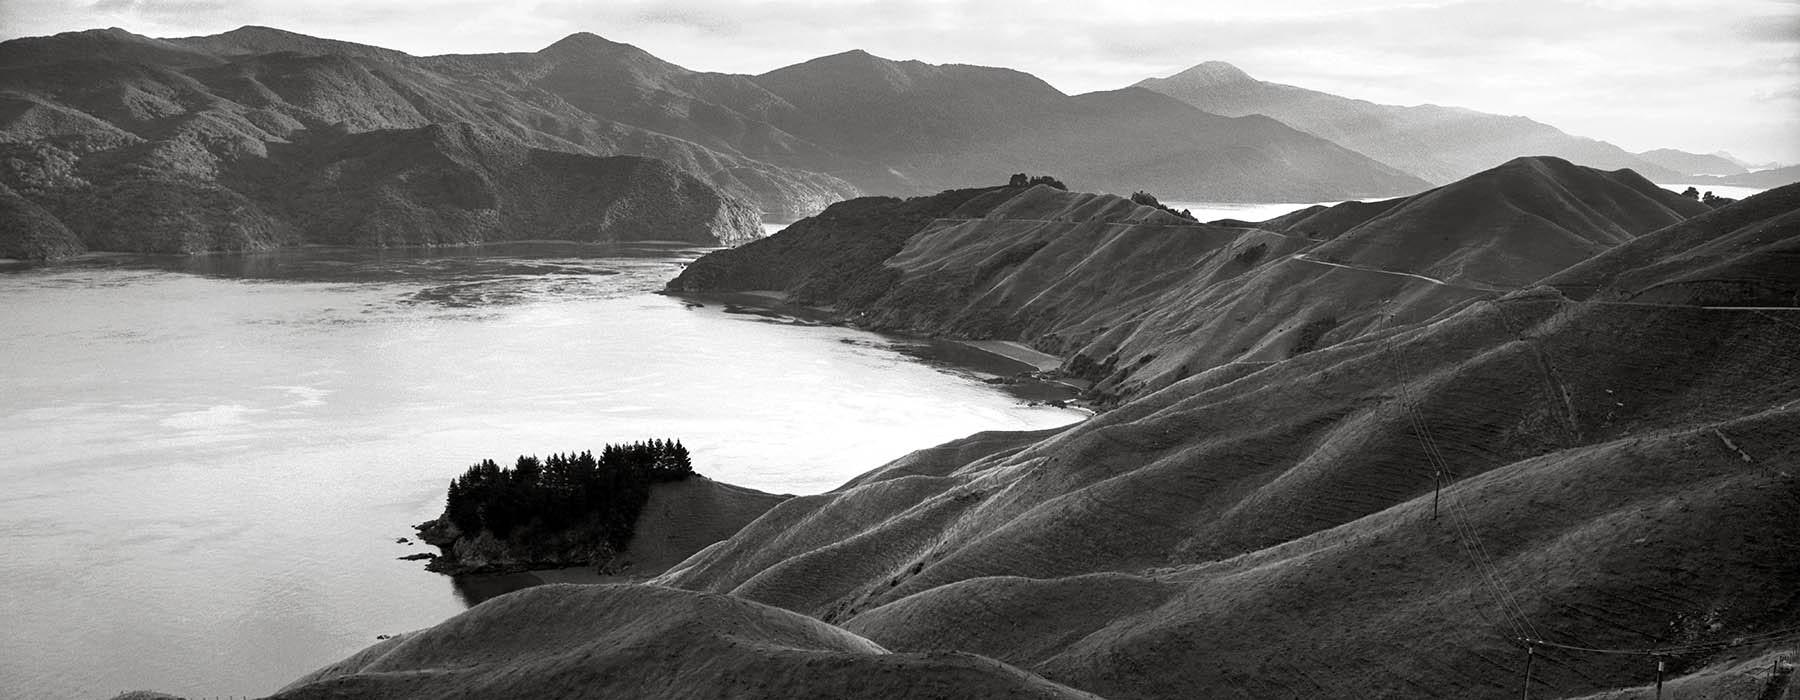 Black and white photograph of French Pass, Marlborough Sounds